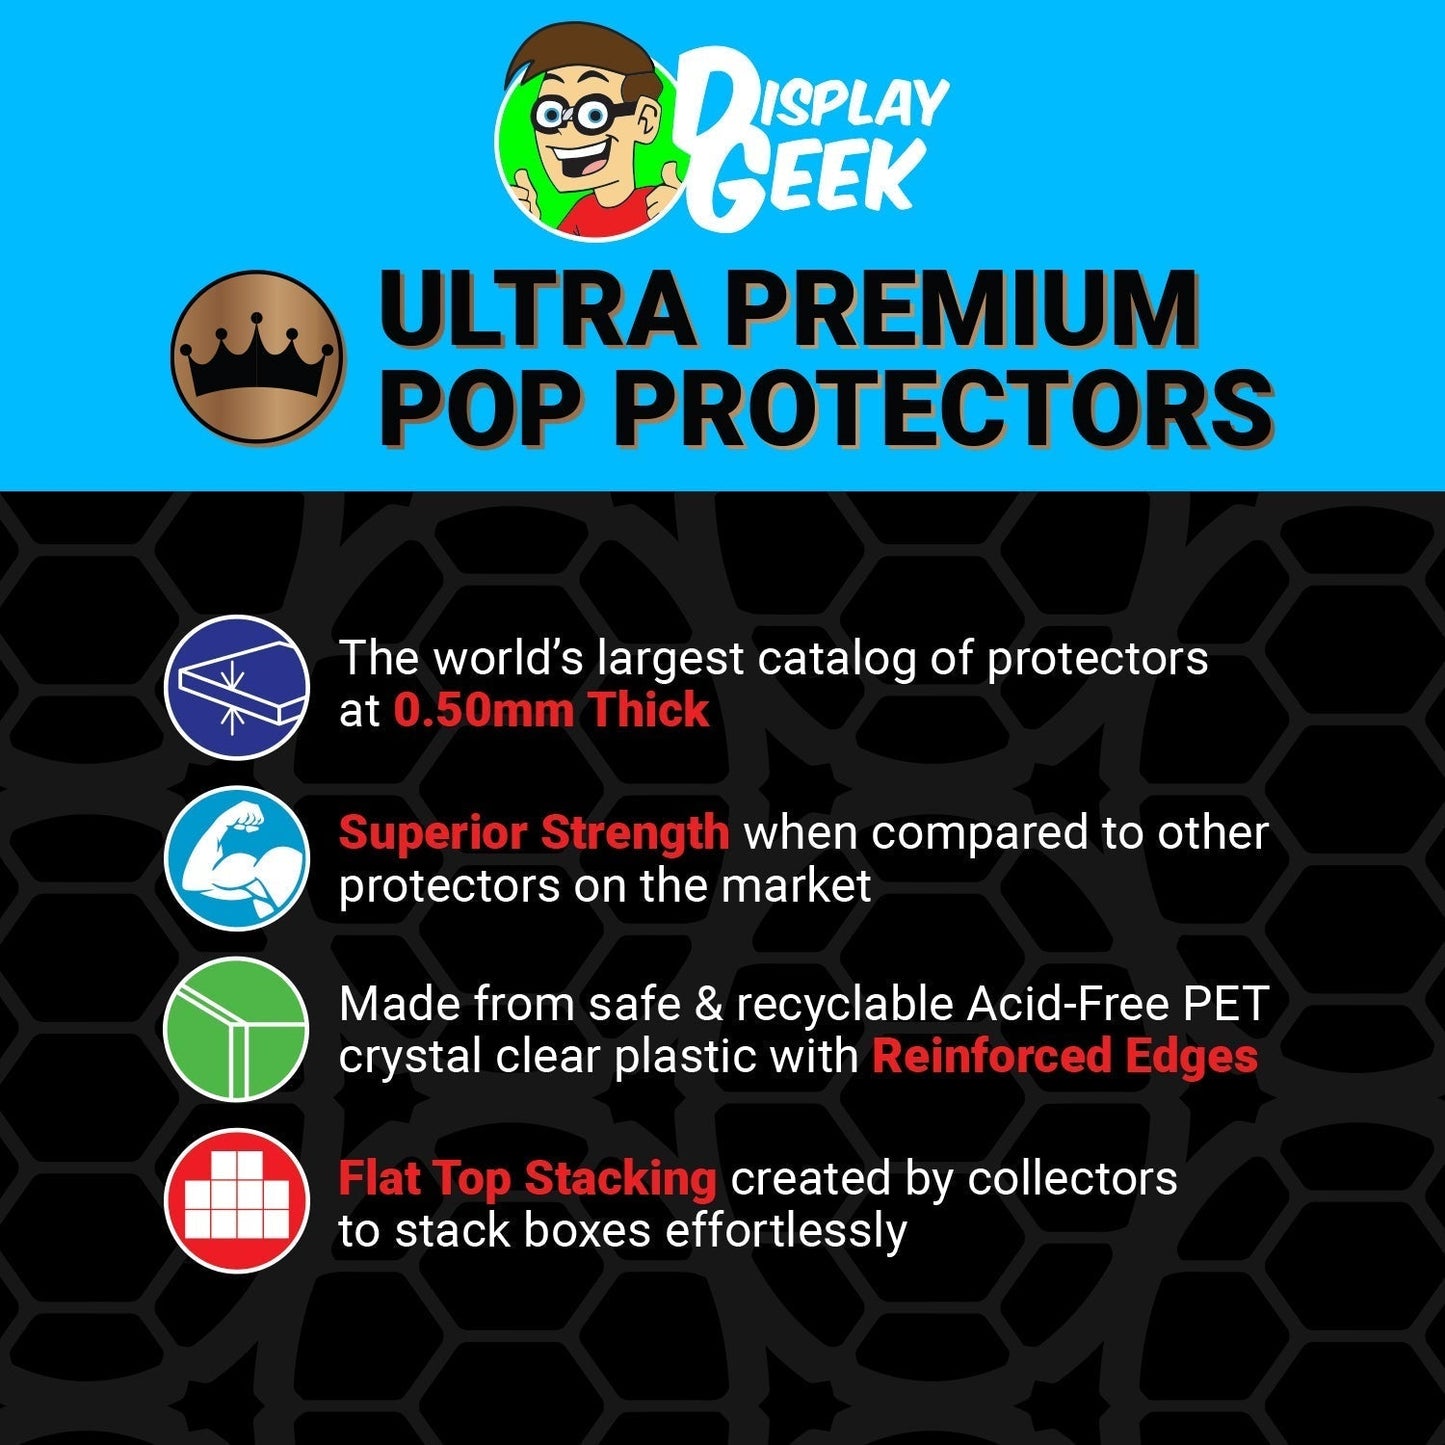 Pop Protector for 5 Pack Pearl Jam Zombie Glow Funko Pop - PPG Pop Protector Guide Search Created by Display Geek